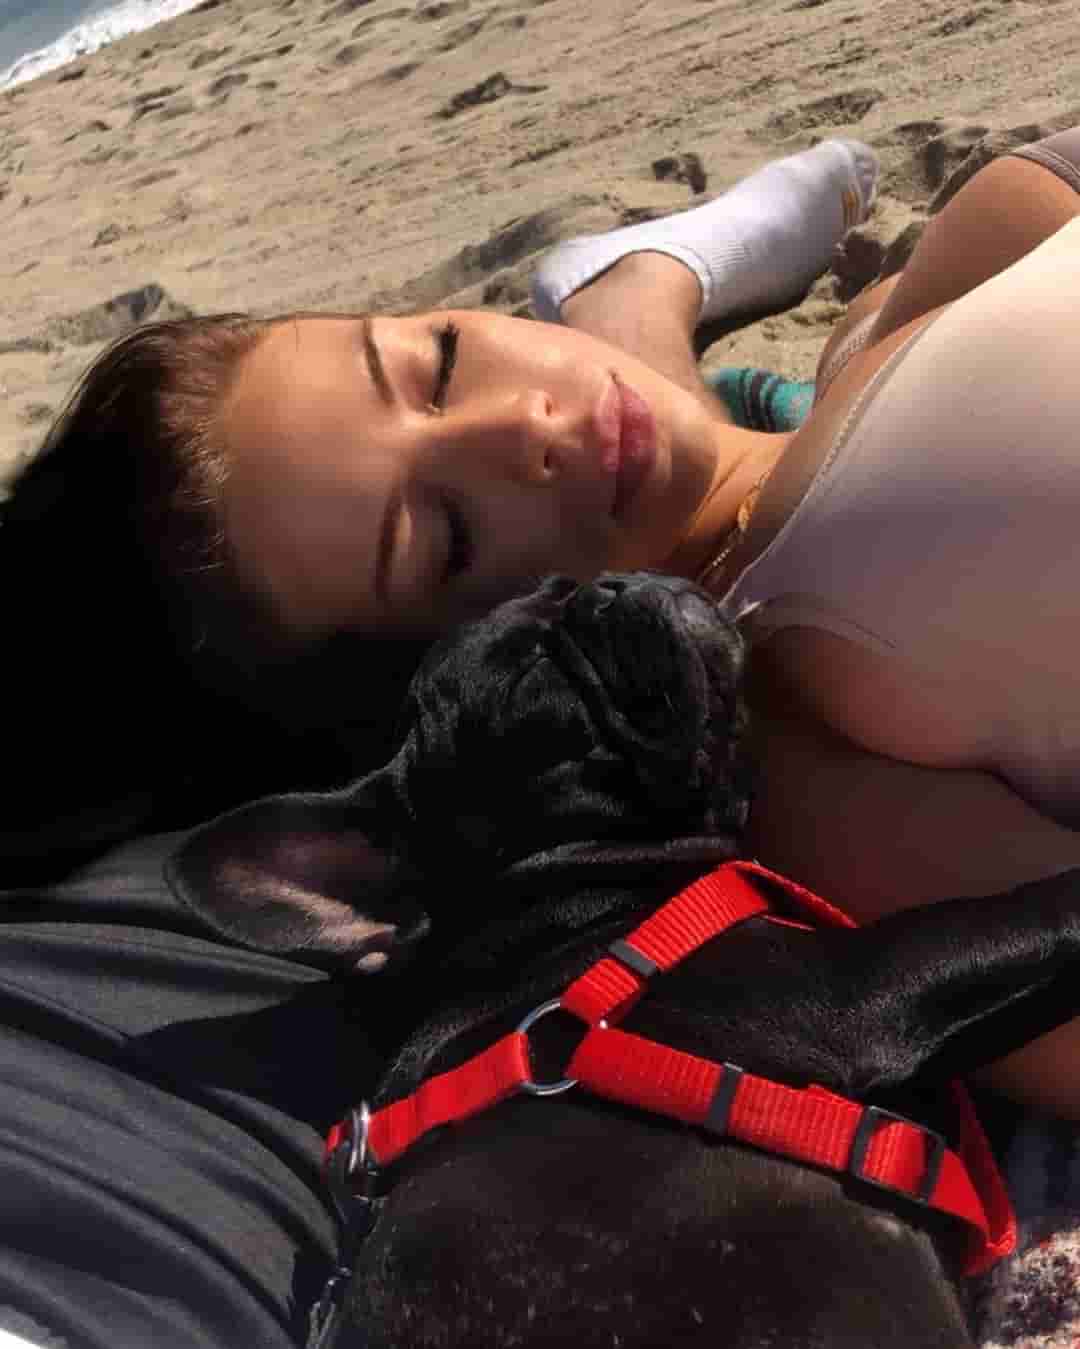 Izabela Izycka having a great time on the beach with her pet Bentley,